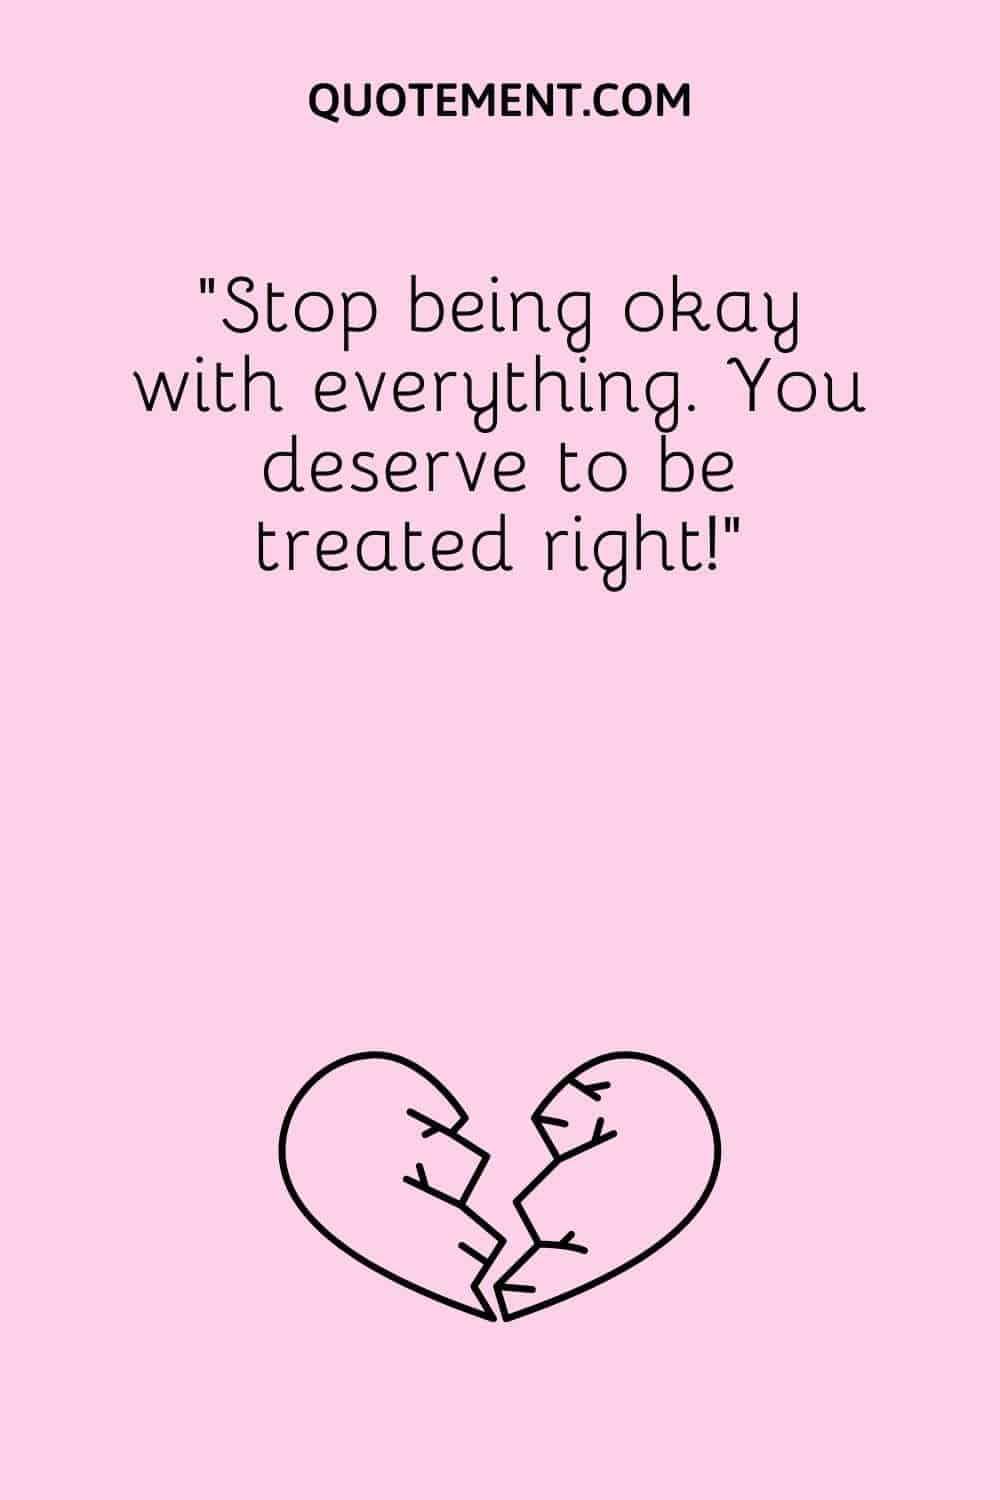 “Stop being okay with everything. You deserve to be treated right!”